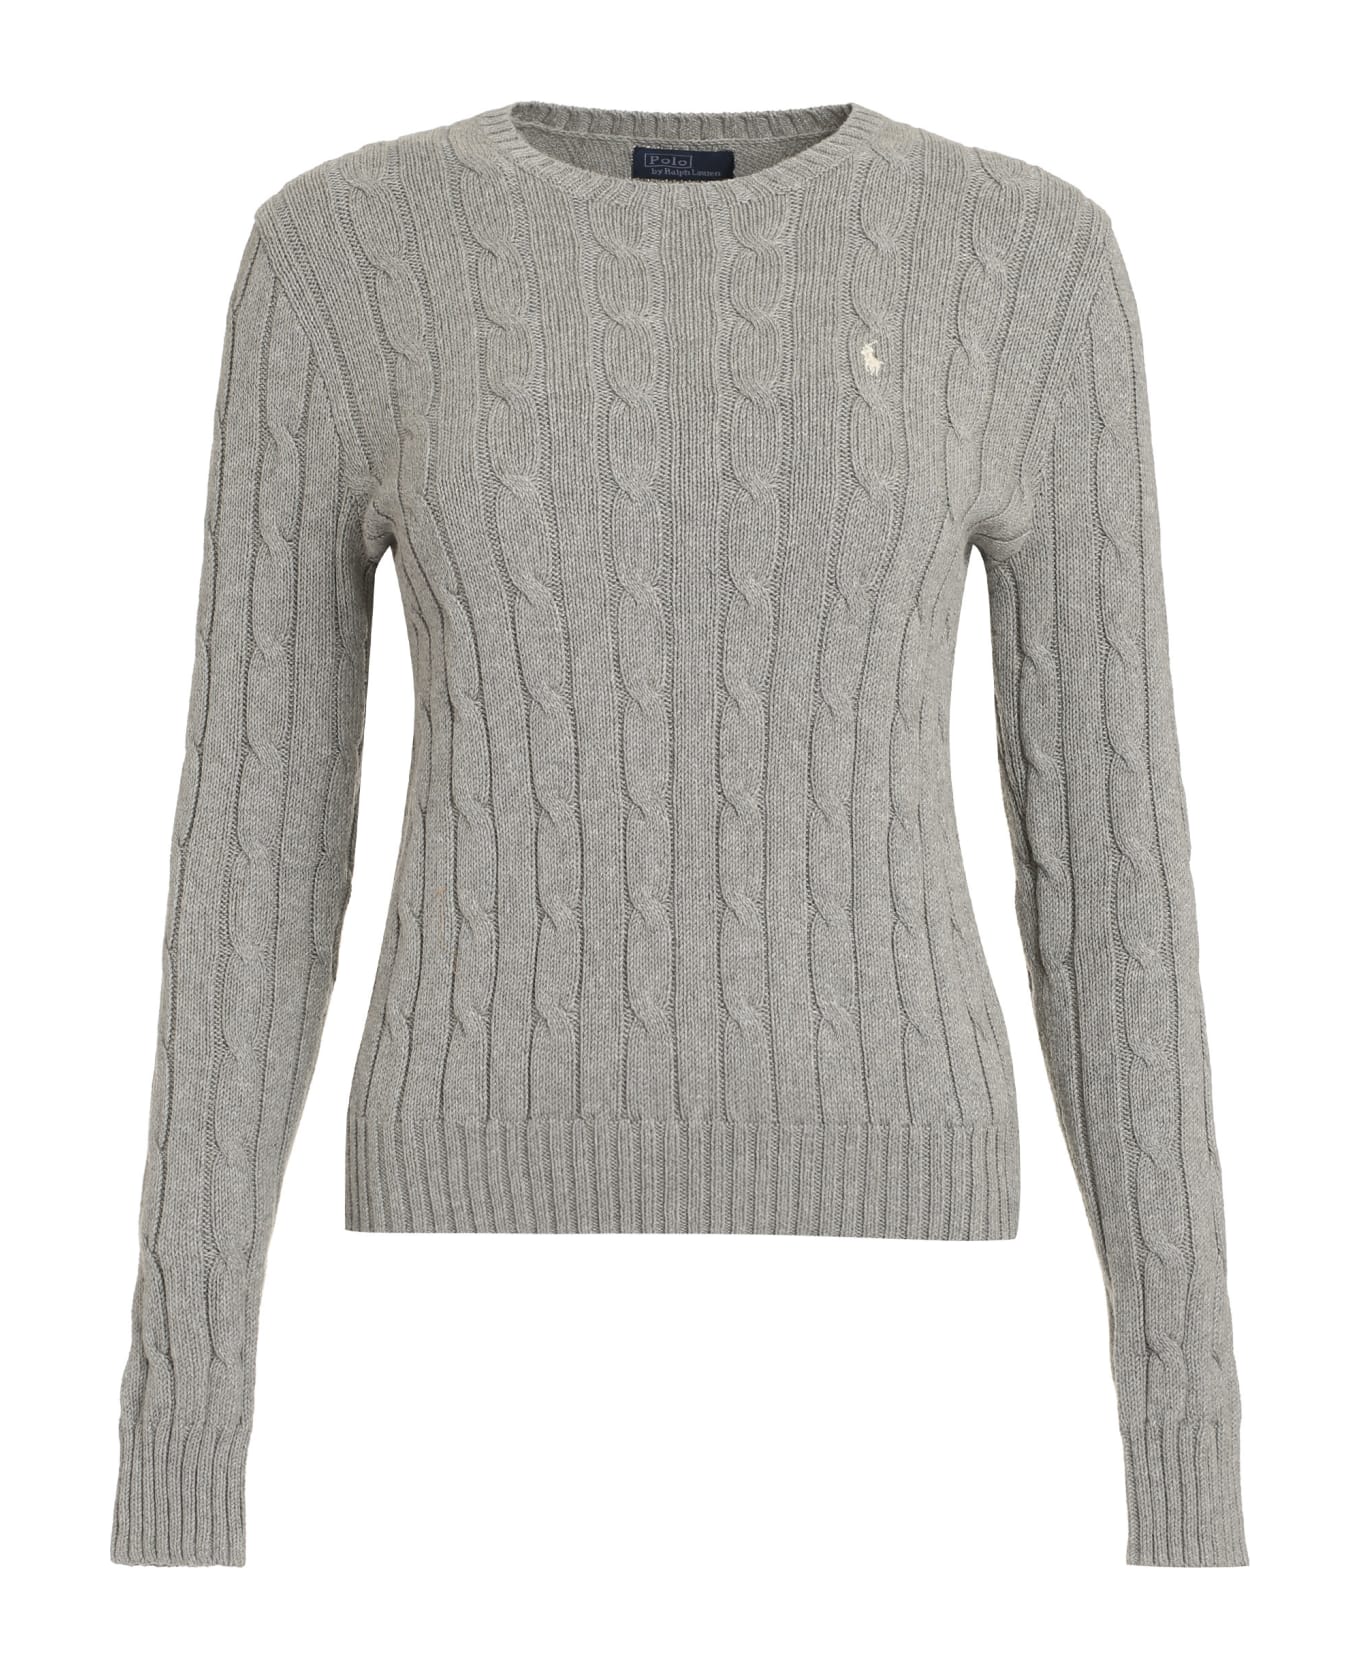 Polo Ralph Lauren Cable Knit Sweater - grey